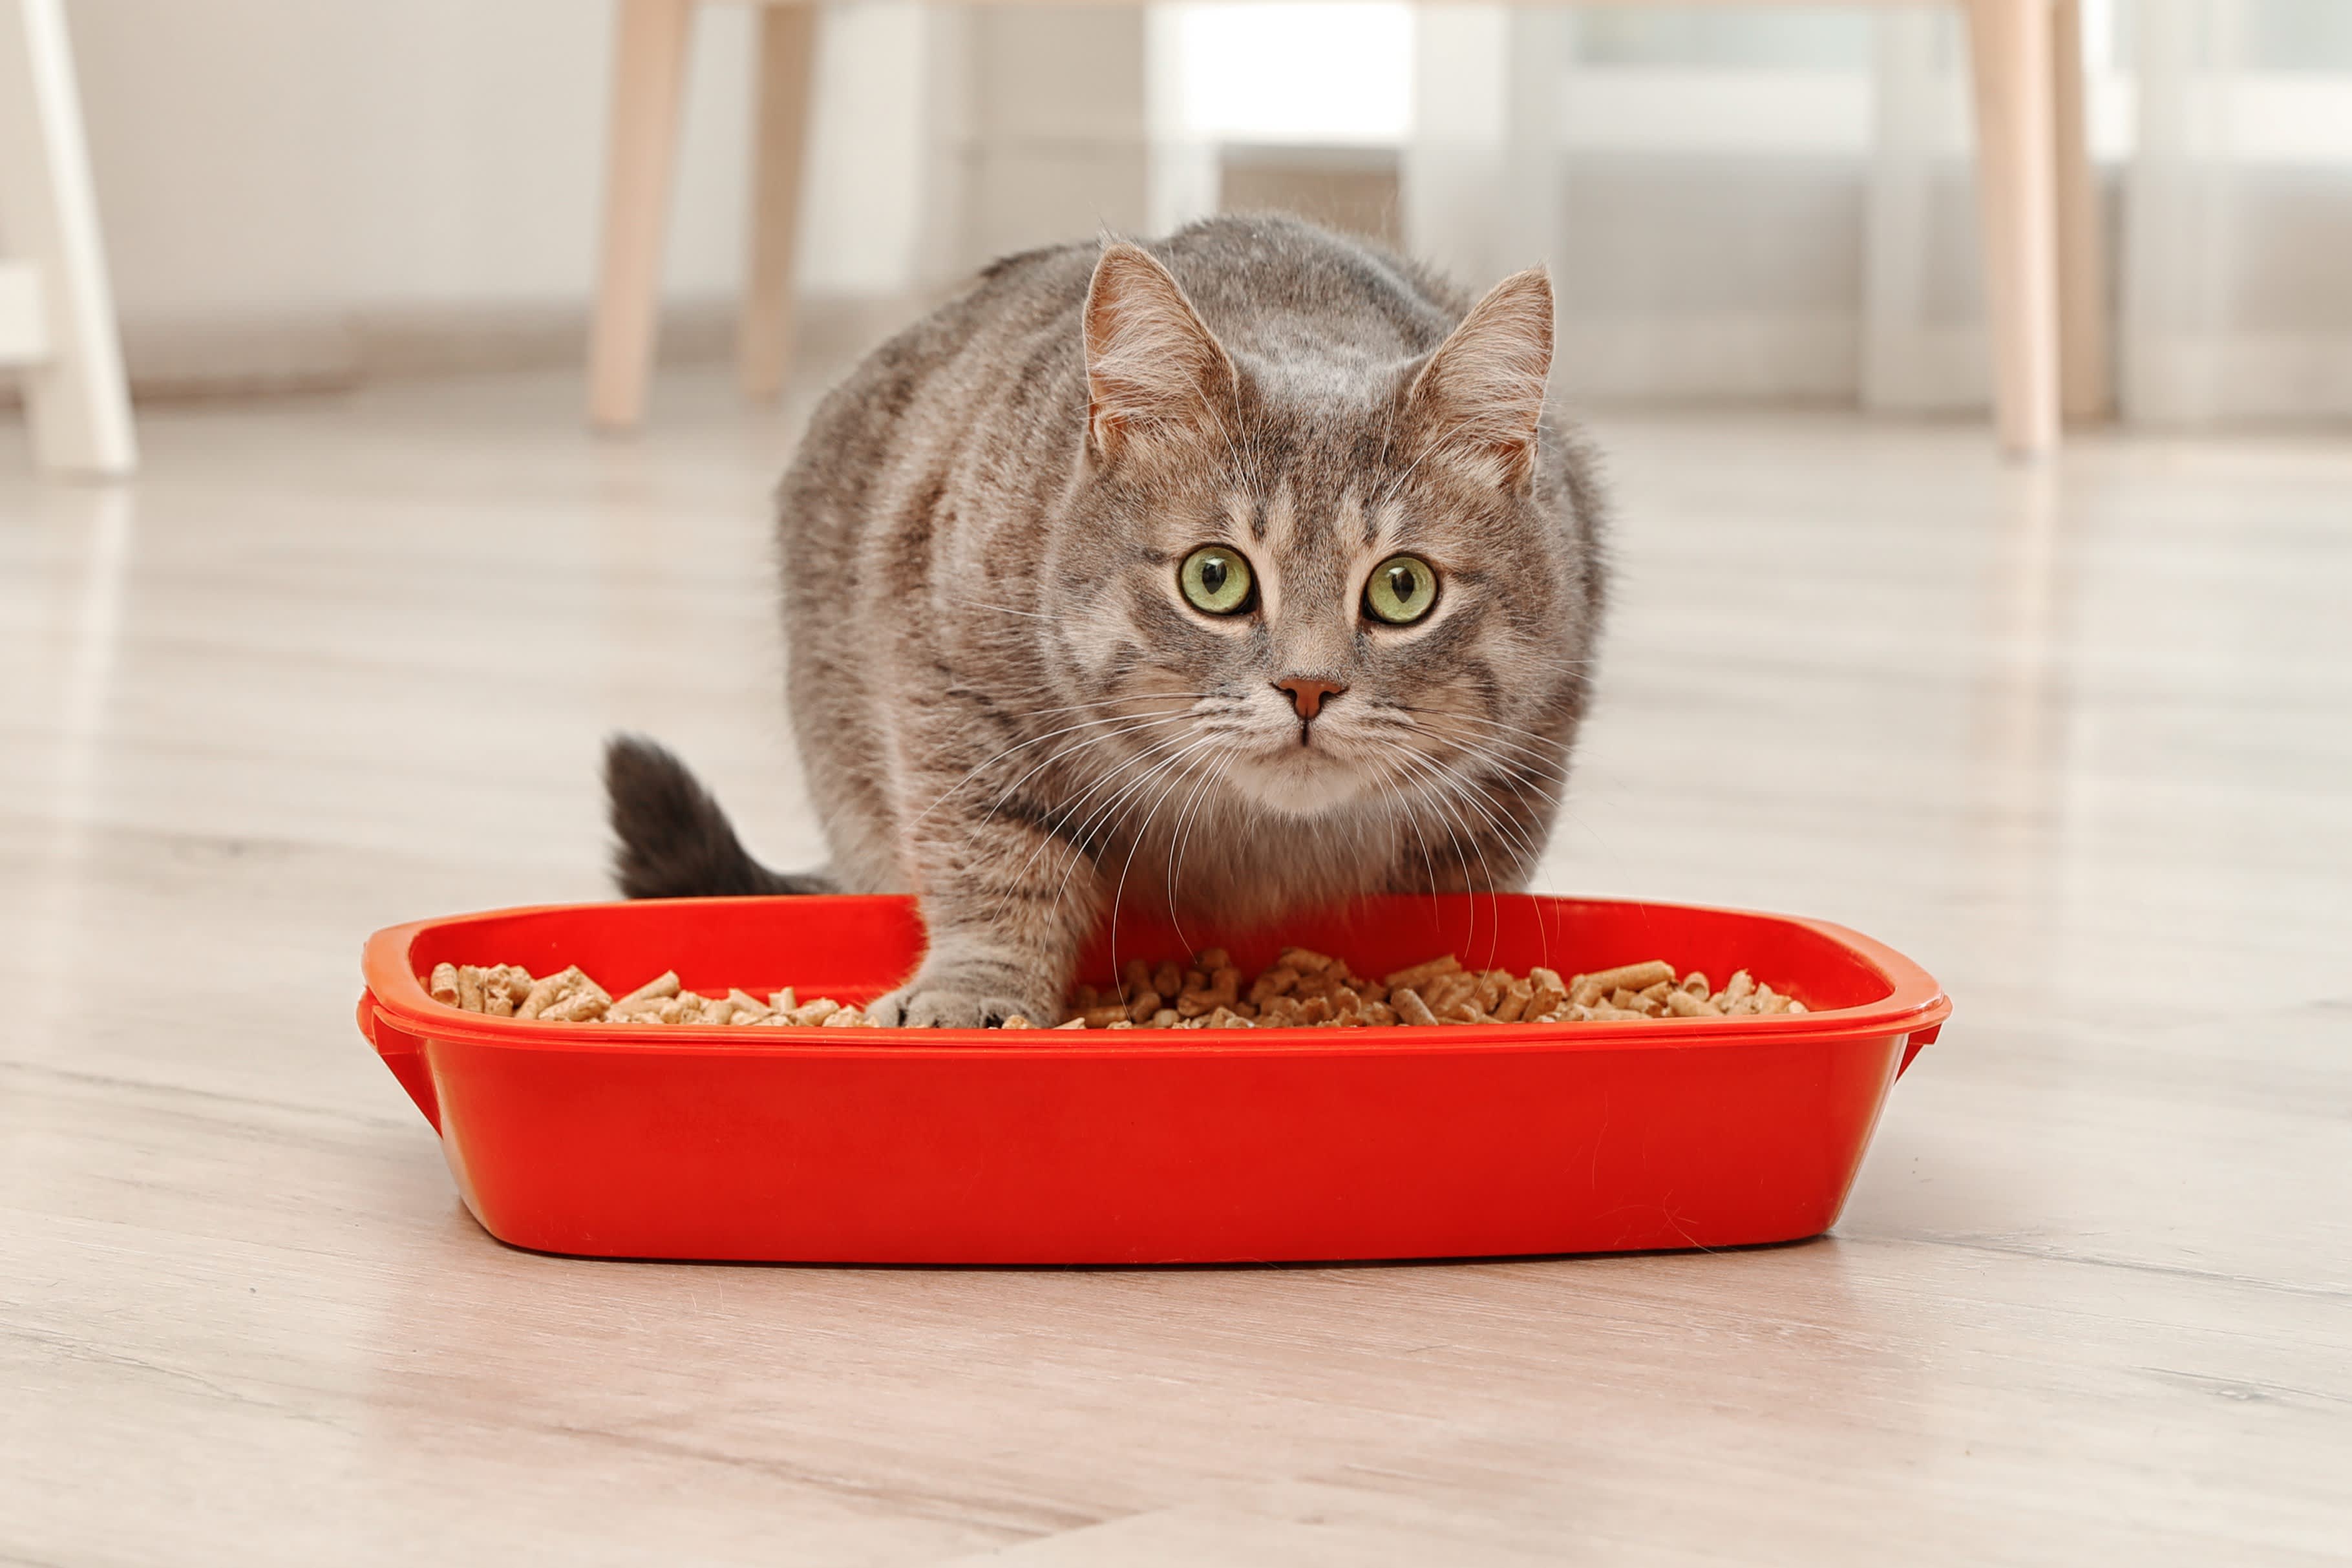 6 Litter Box Mistakes You Don't Want To Make